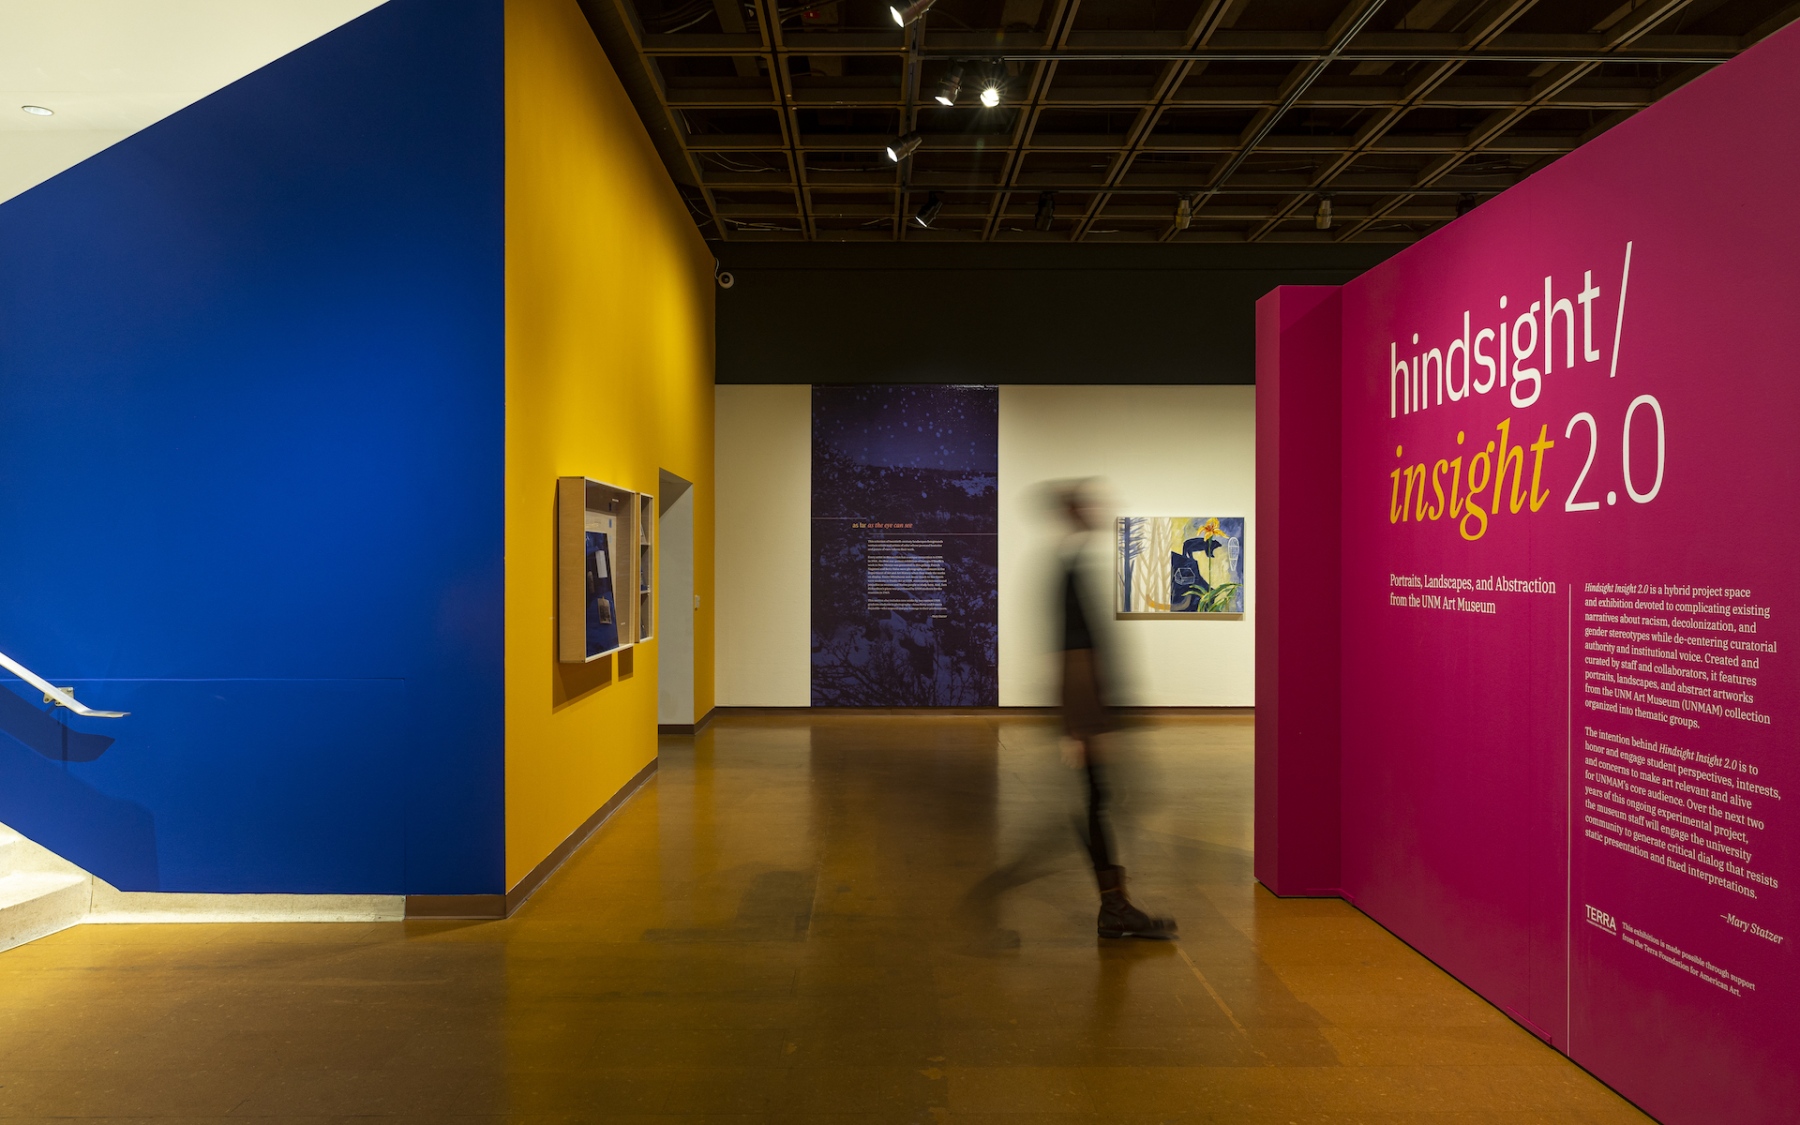 "Hindsight Insight 2.0: Portraits, Landscapes, and Abstraction from the UNM Art Museum"